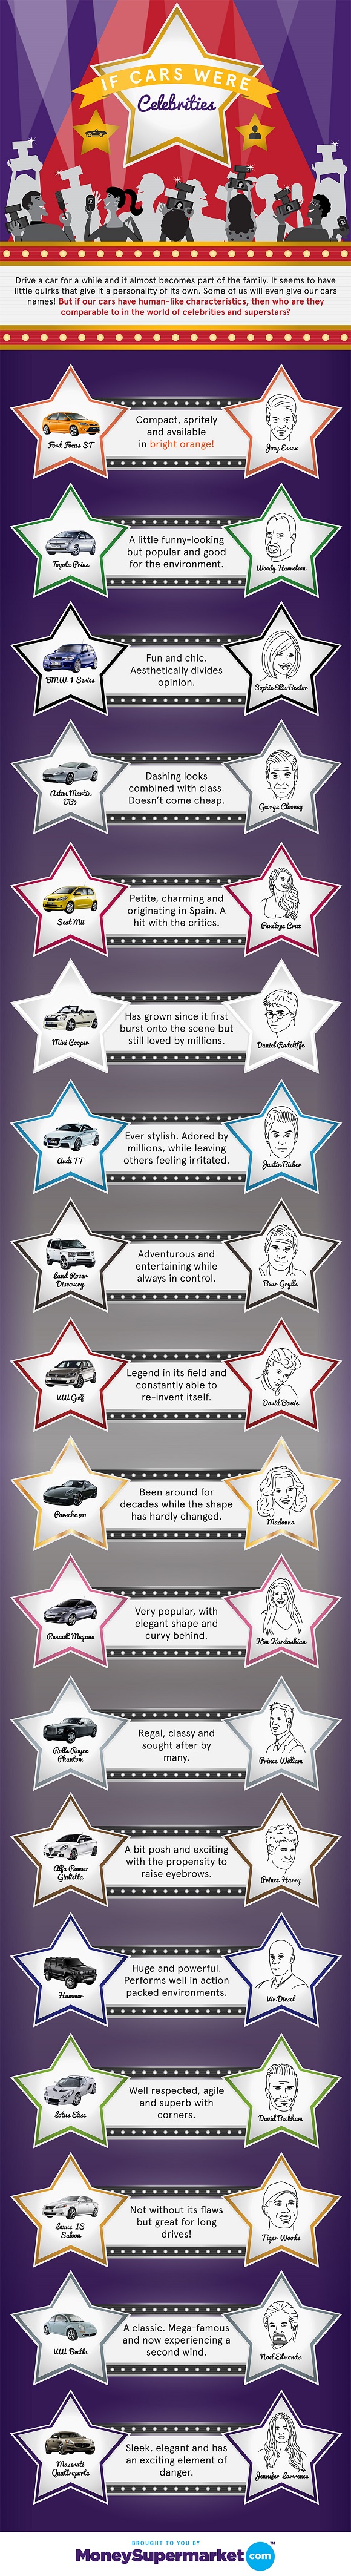 If Cars Were Celebrities Infographic v3b